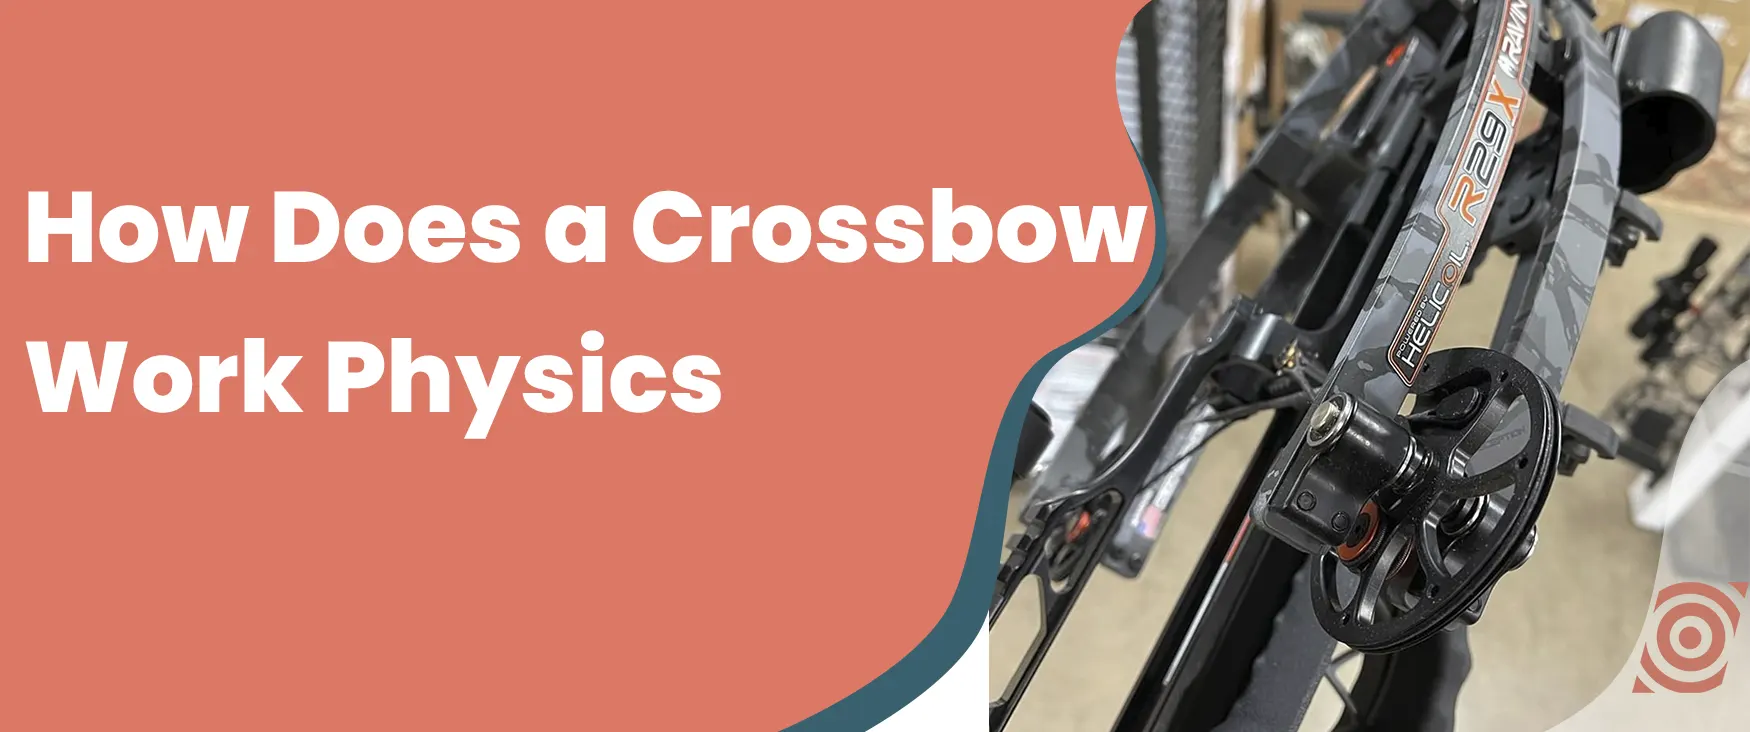 How Does a Crossbow Work Physics